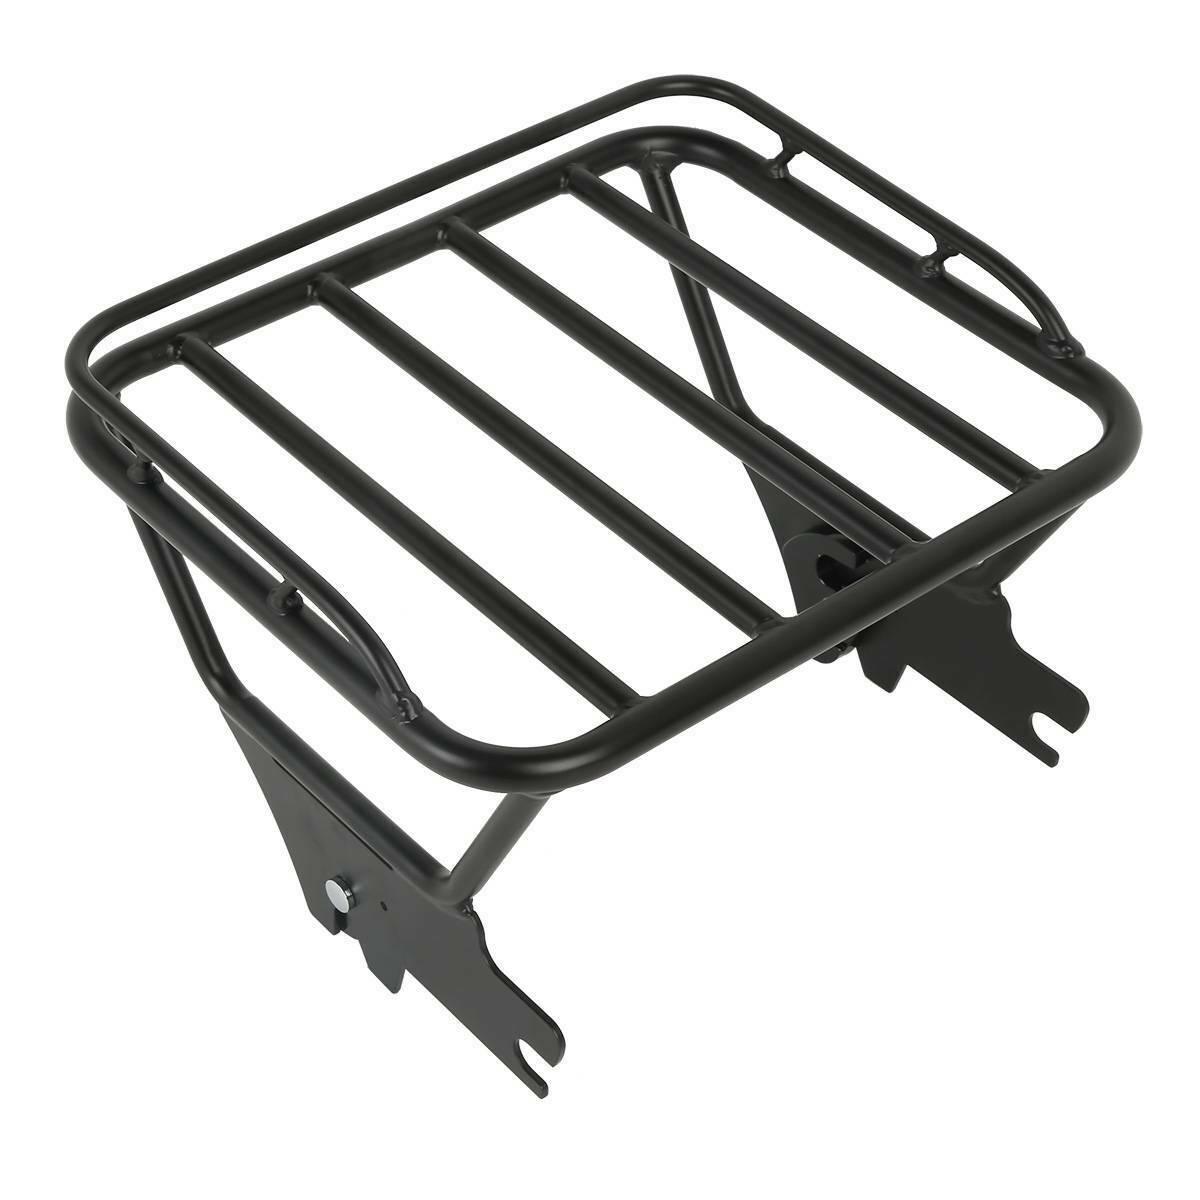 Dull Black 2 Up Luggage Rack Docking Hardware Fit For Harley Touring Glide 97-08 - Moto Life Products